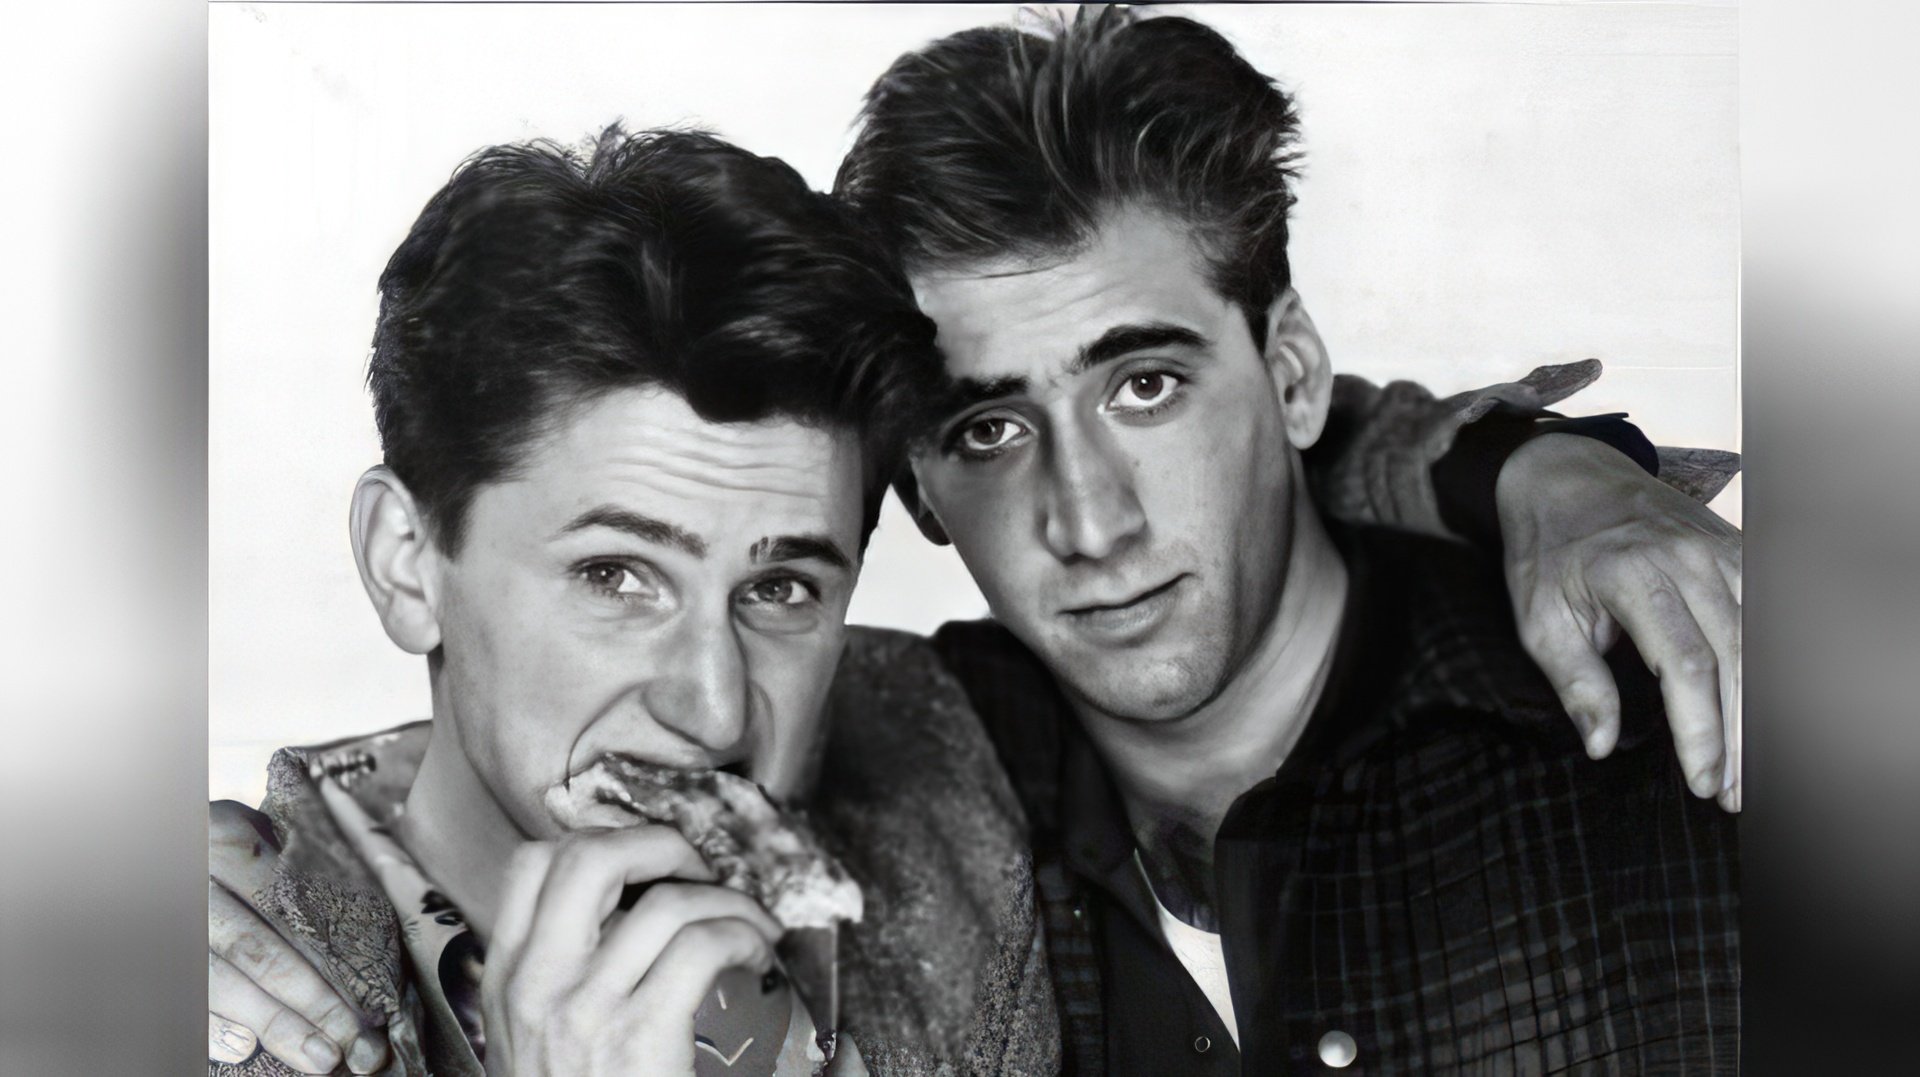 Nicolas Cage with the young Sean Penn